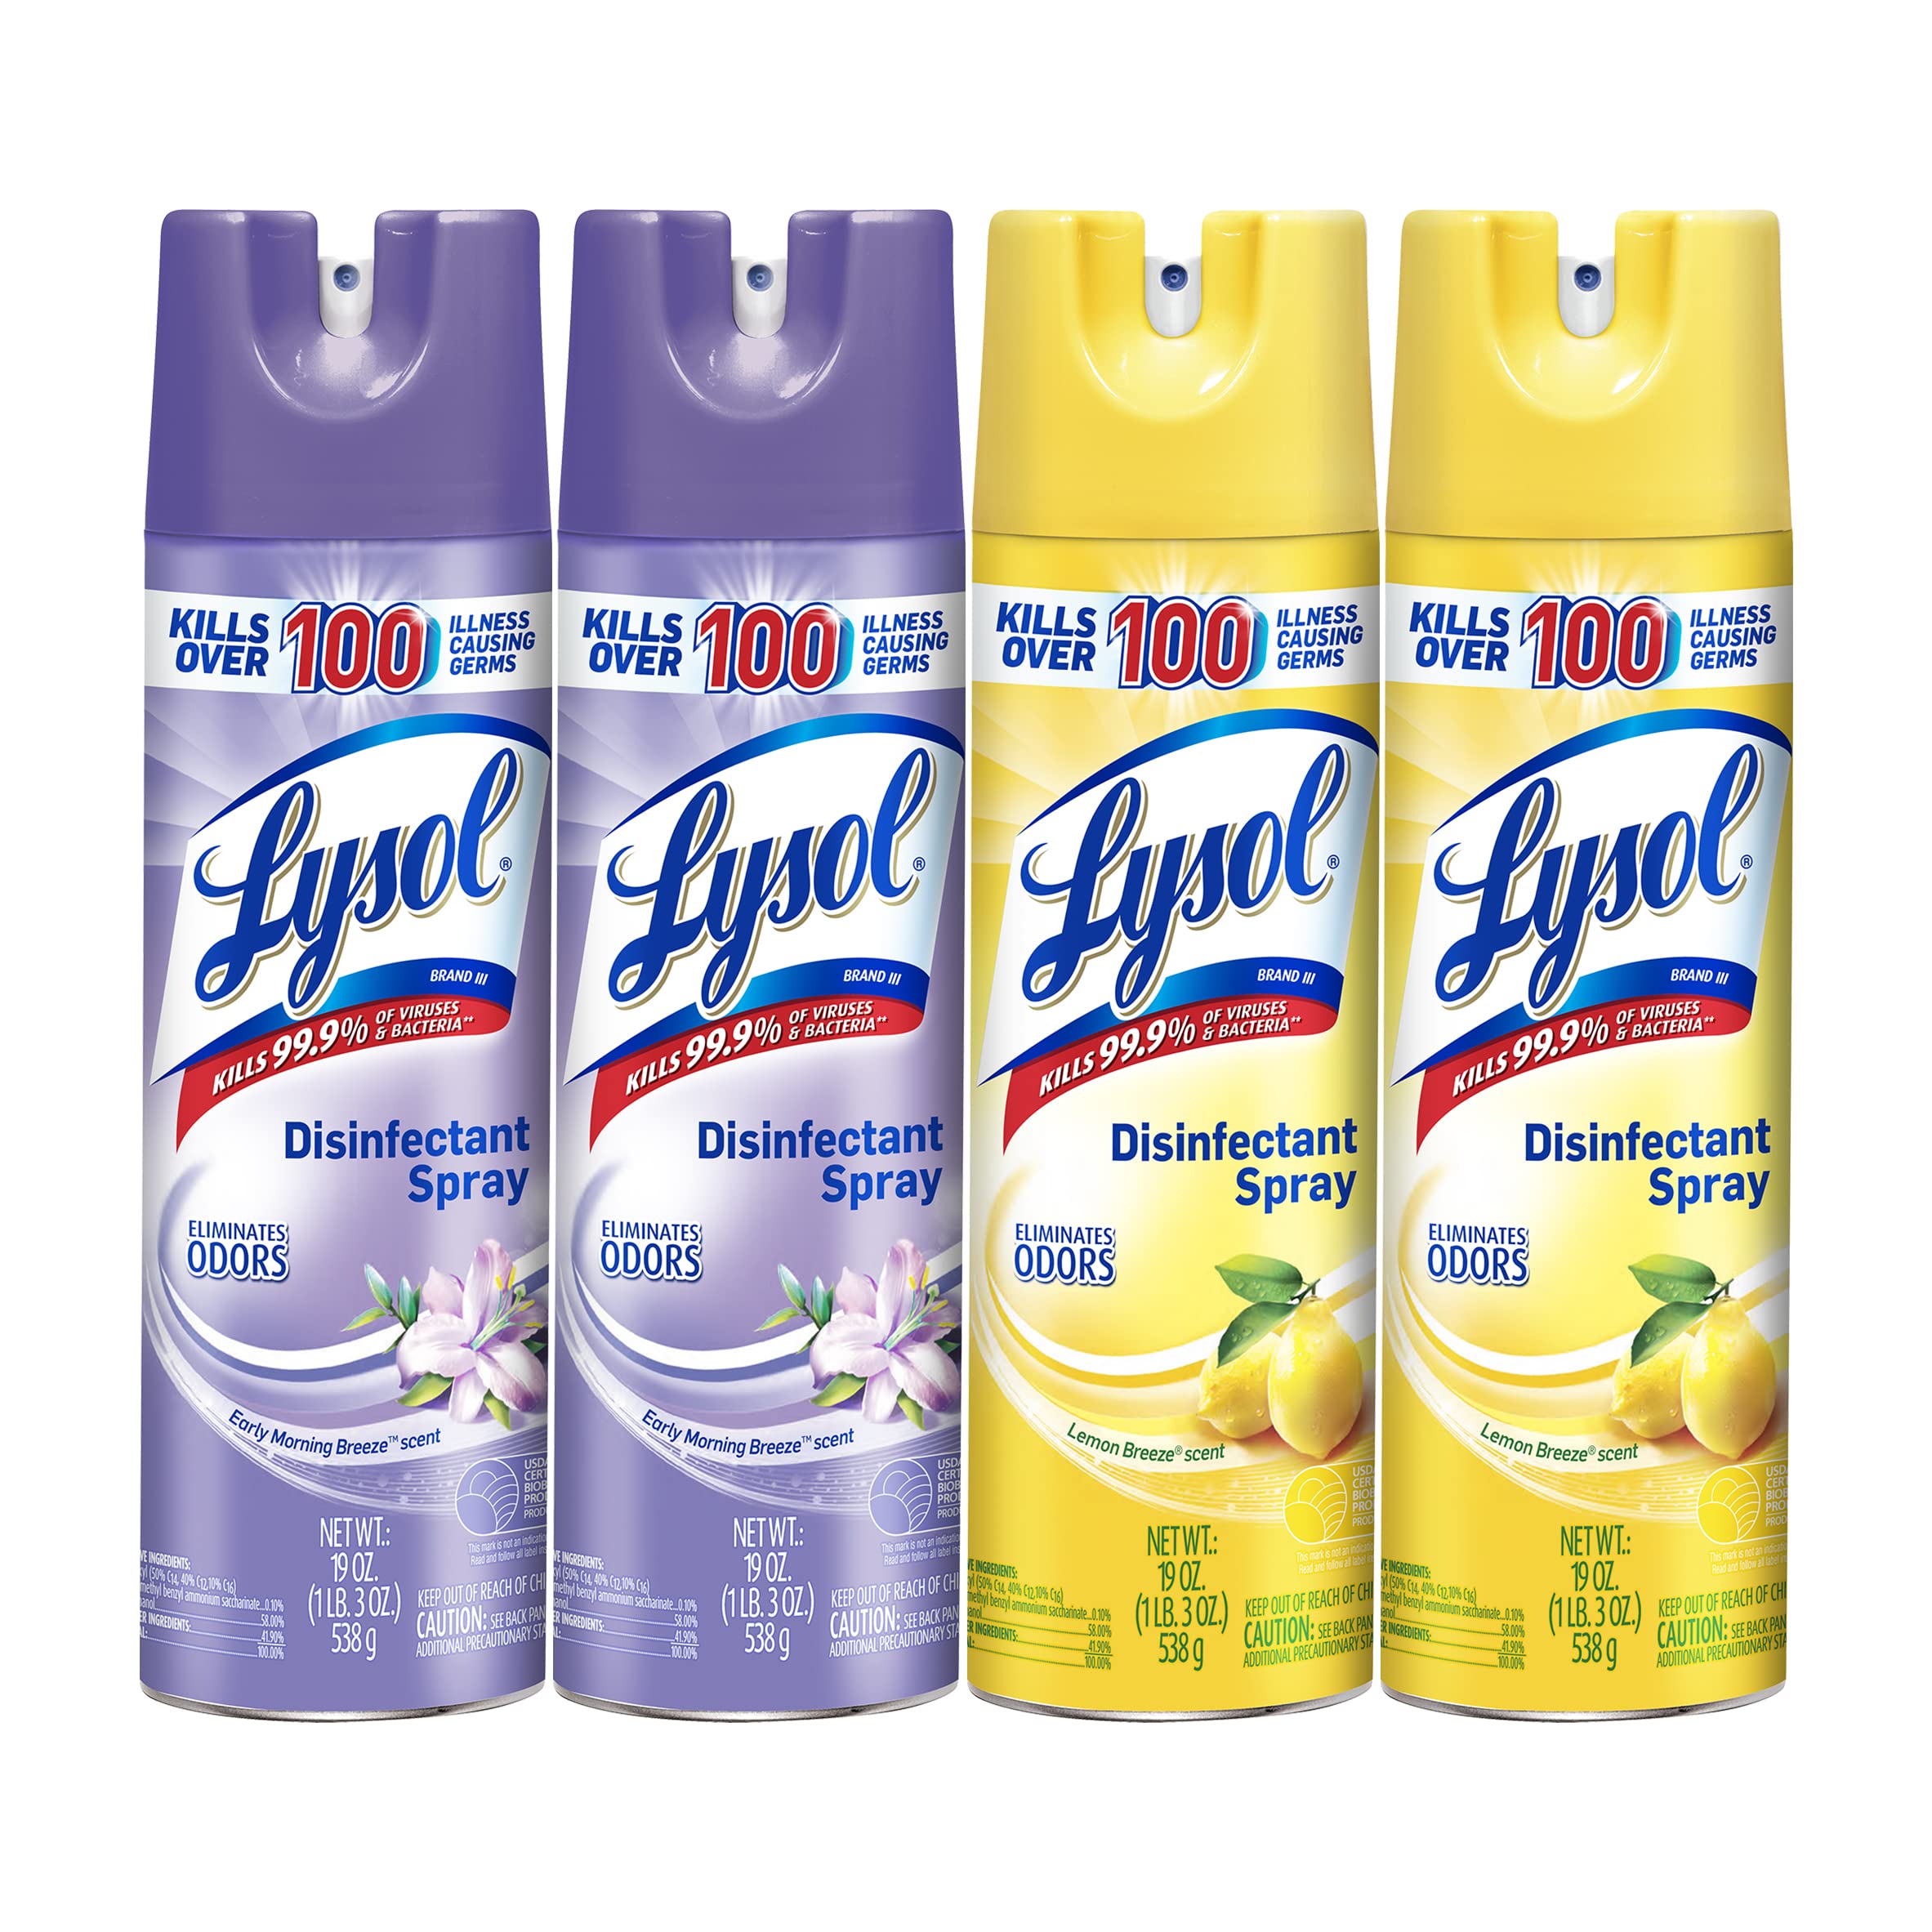 Lysol Disinfectant Spray Bundle, Sanitizing And Antibacterial Spray, For Disinfecting And Deodorizing, contains x2 Lemon Breeze 19 Fl Oz and x2 Early Morning Breeze, 19 Fl Oz, Packaging May Vary